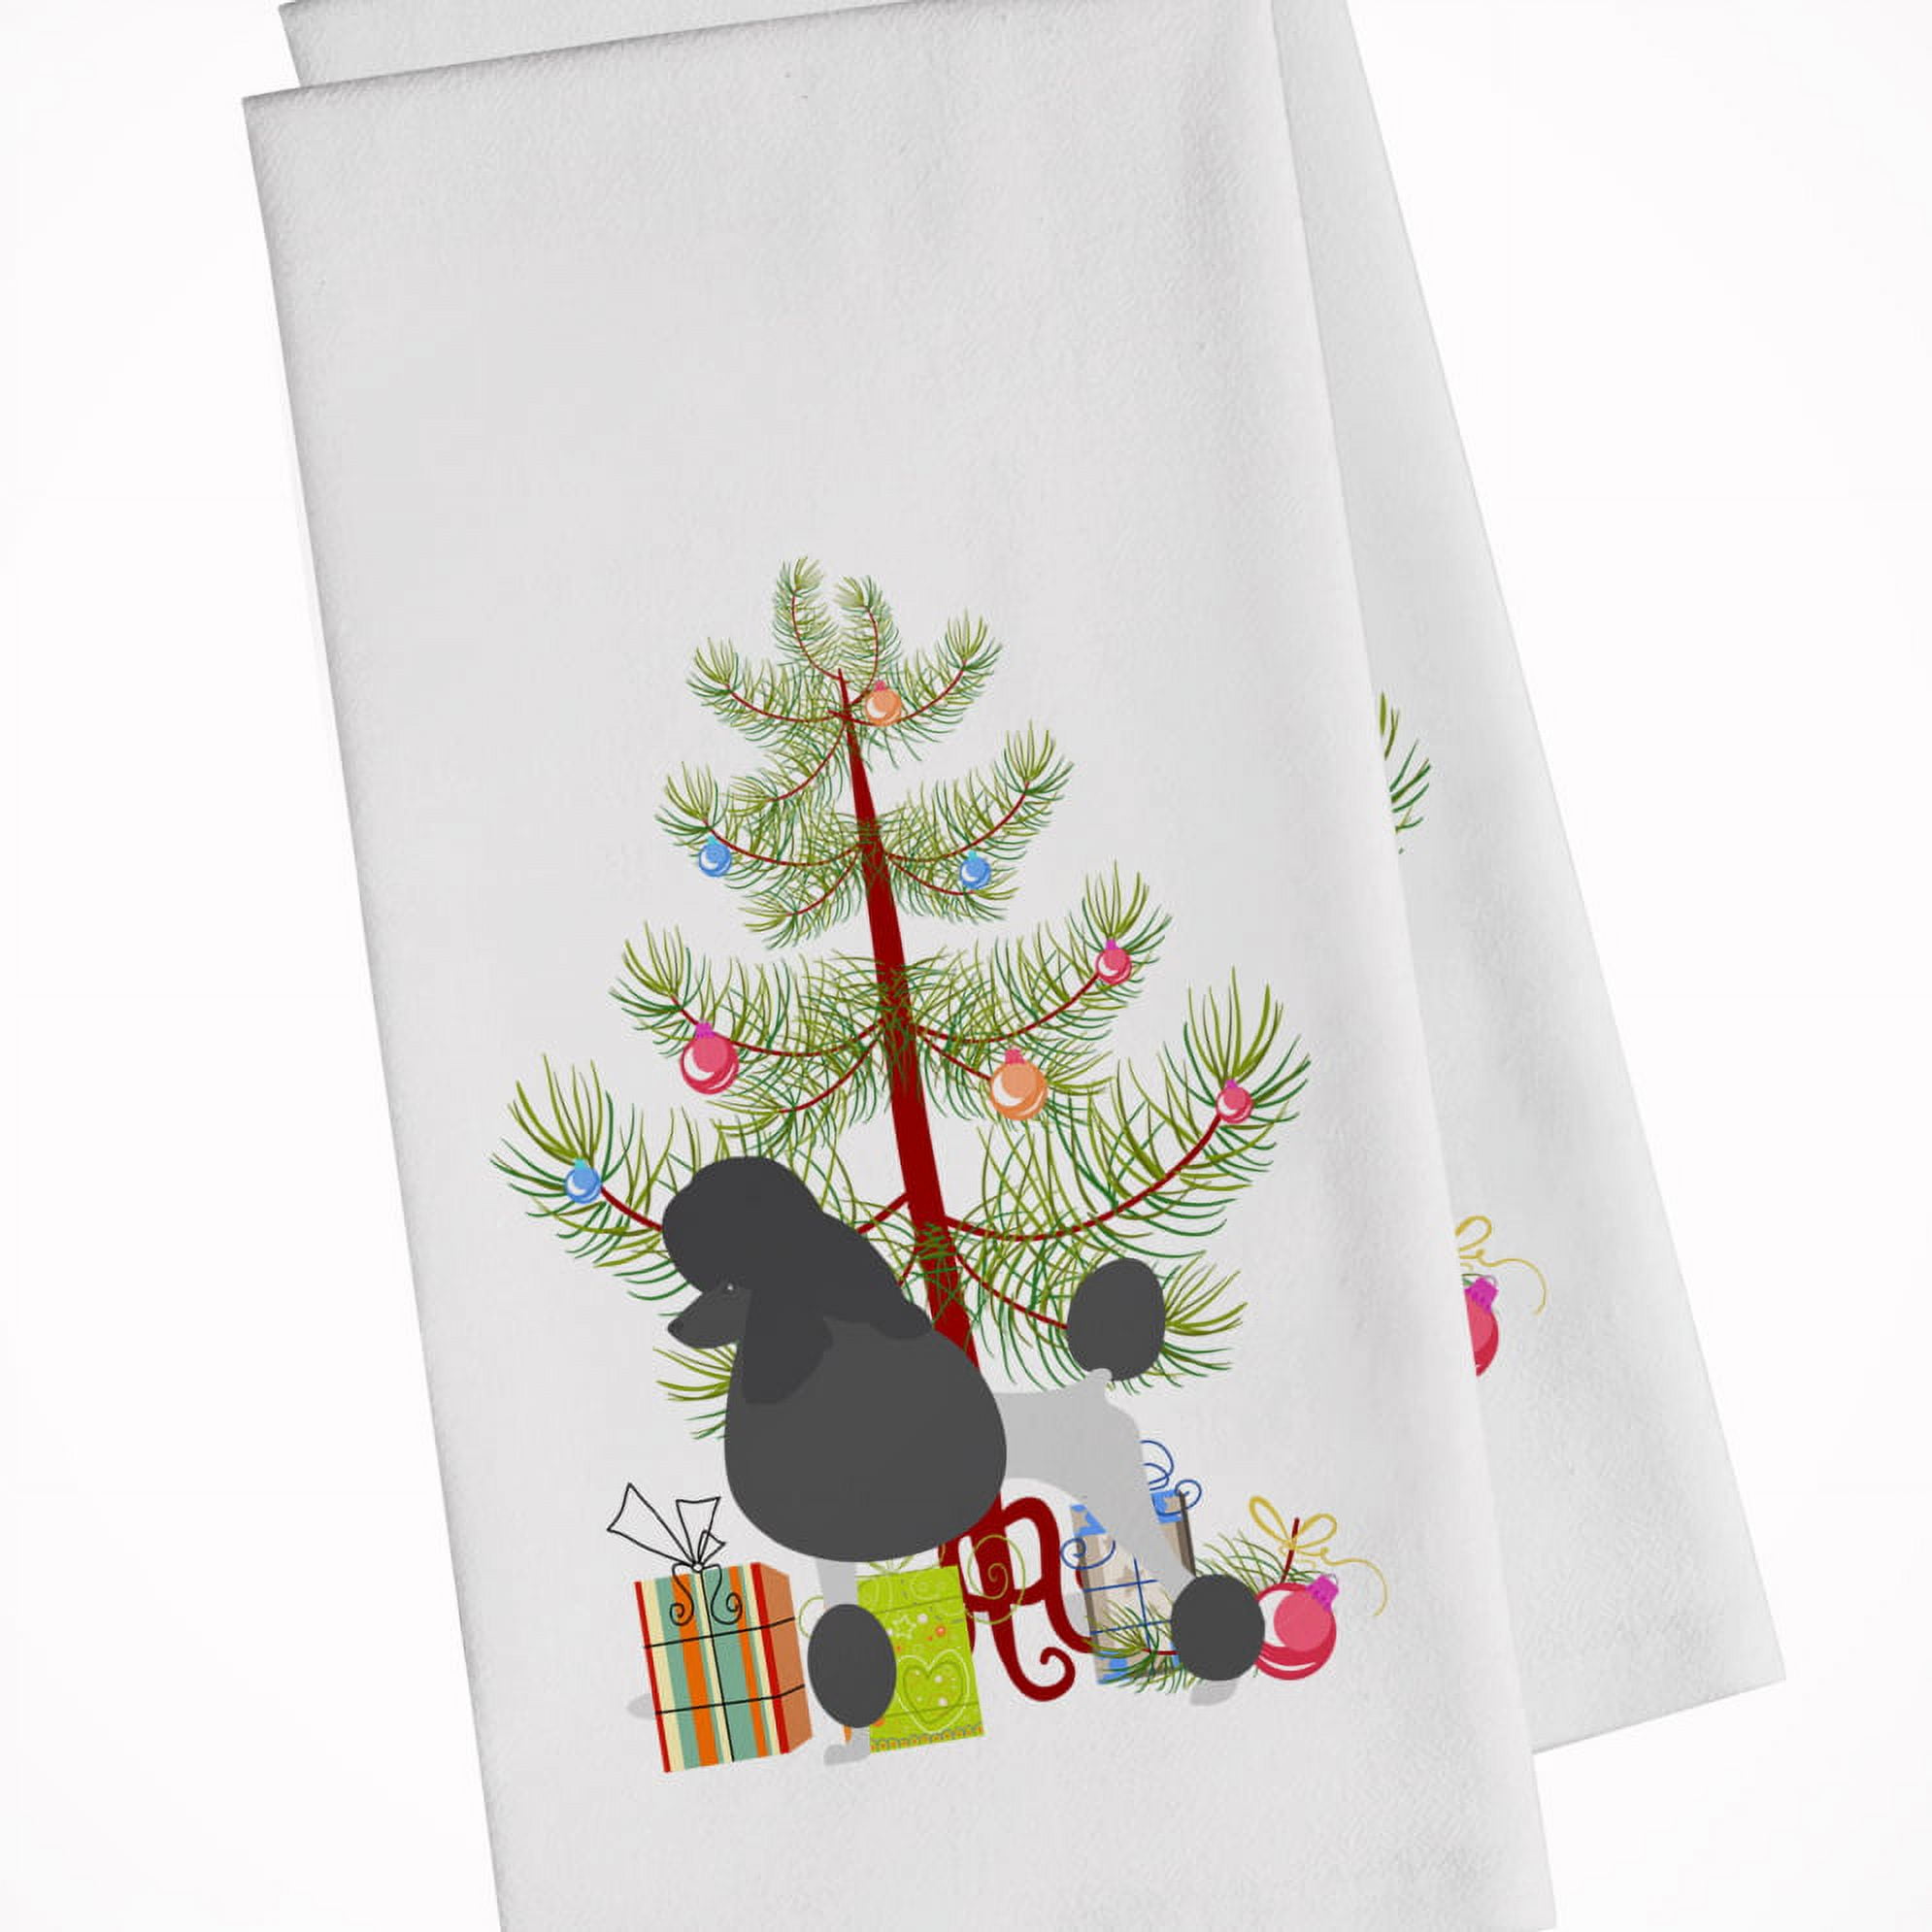 Mud Pie Christmas Kitchen Dish Towels Set Of 2 Assorted - Set H